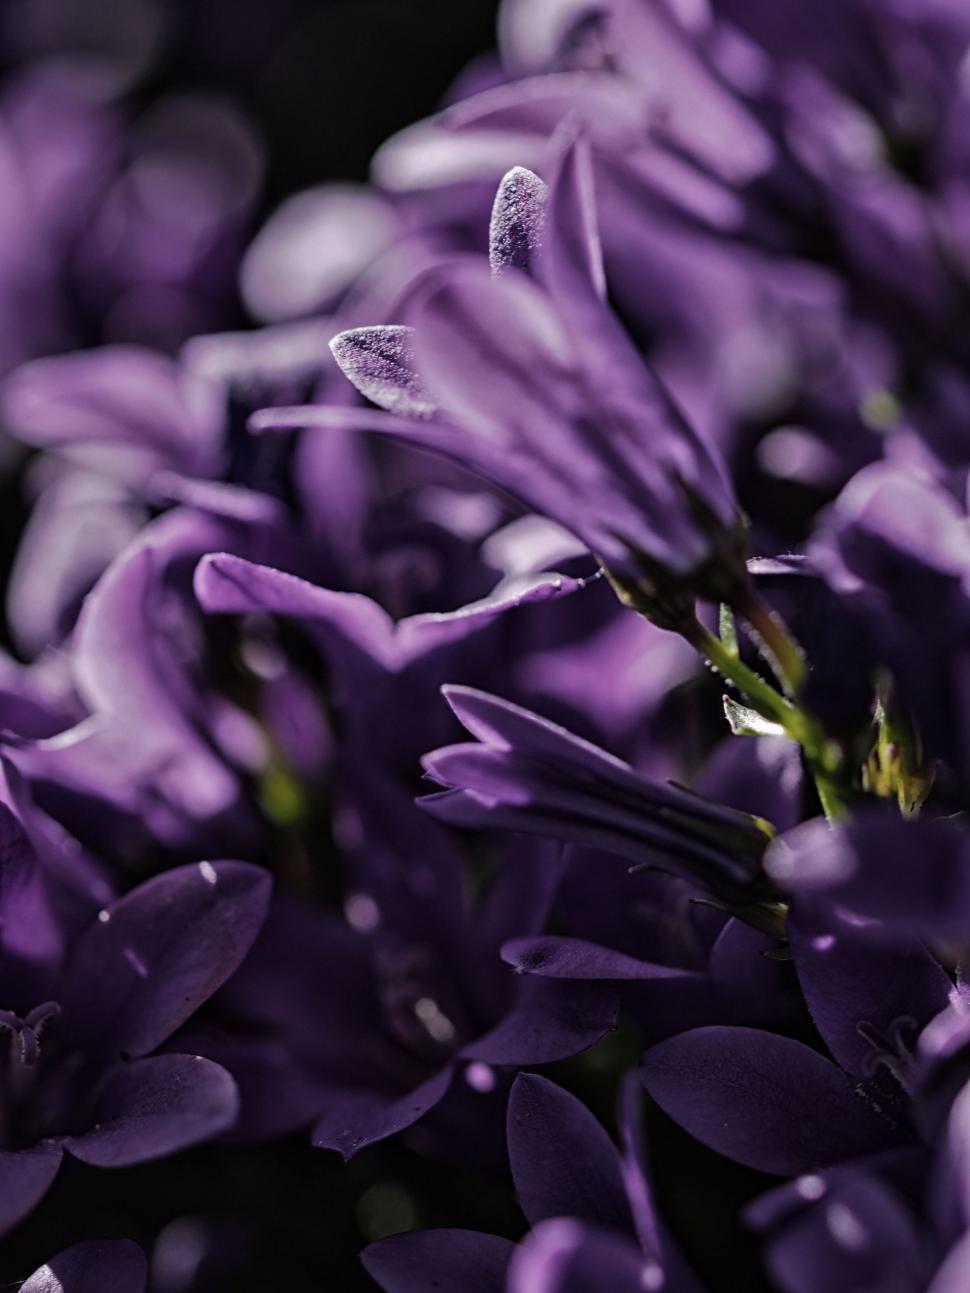 Free Image of Blooming Purple Flowers in a Bunch 